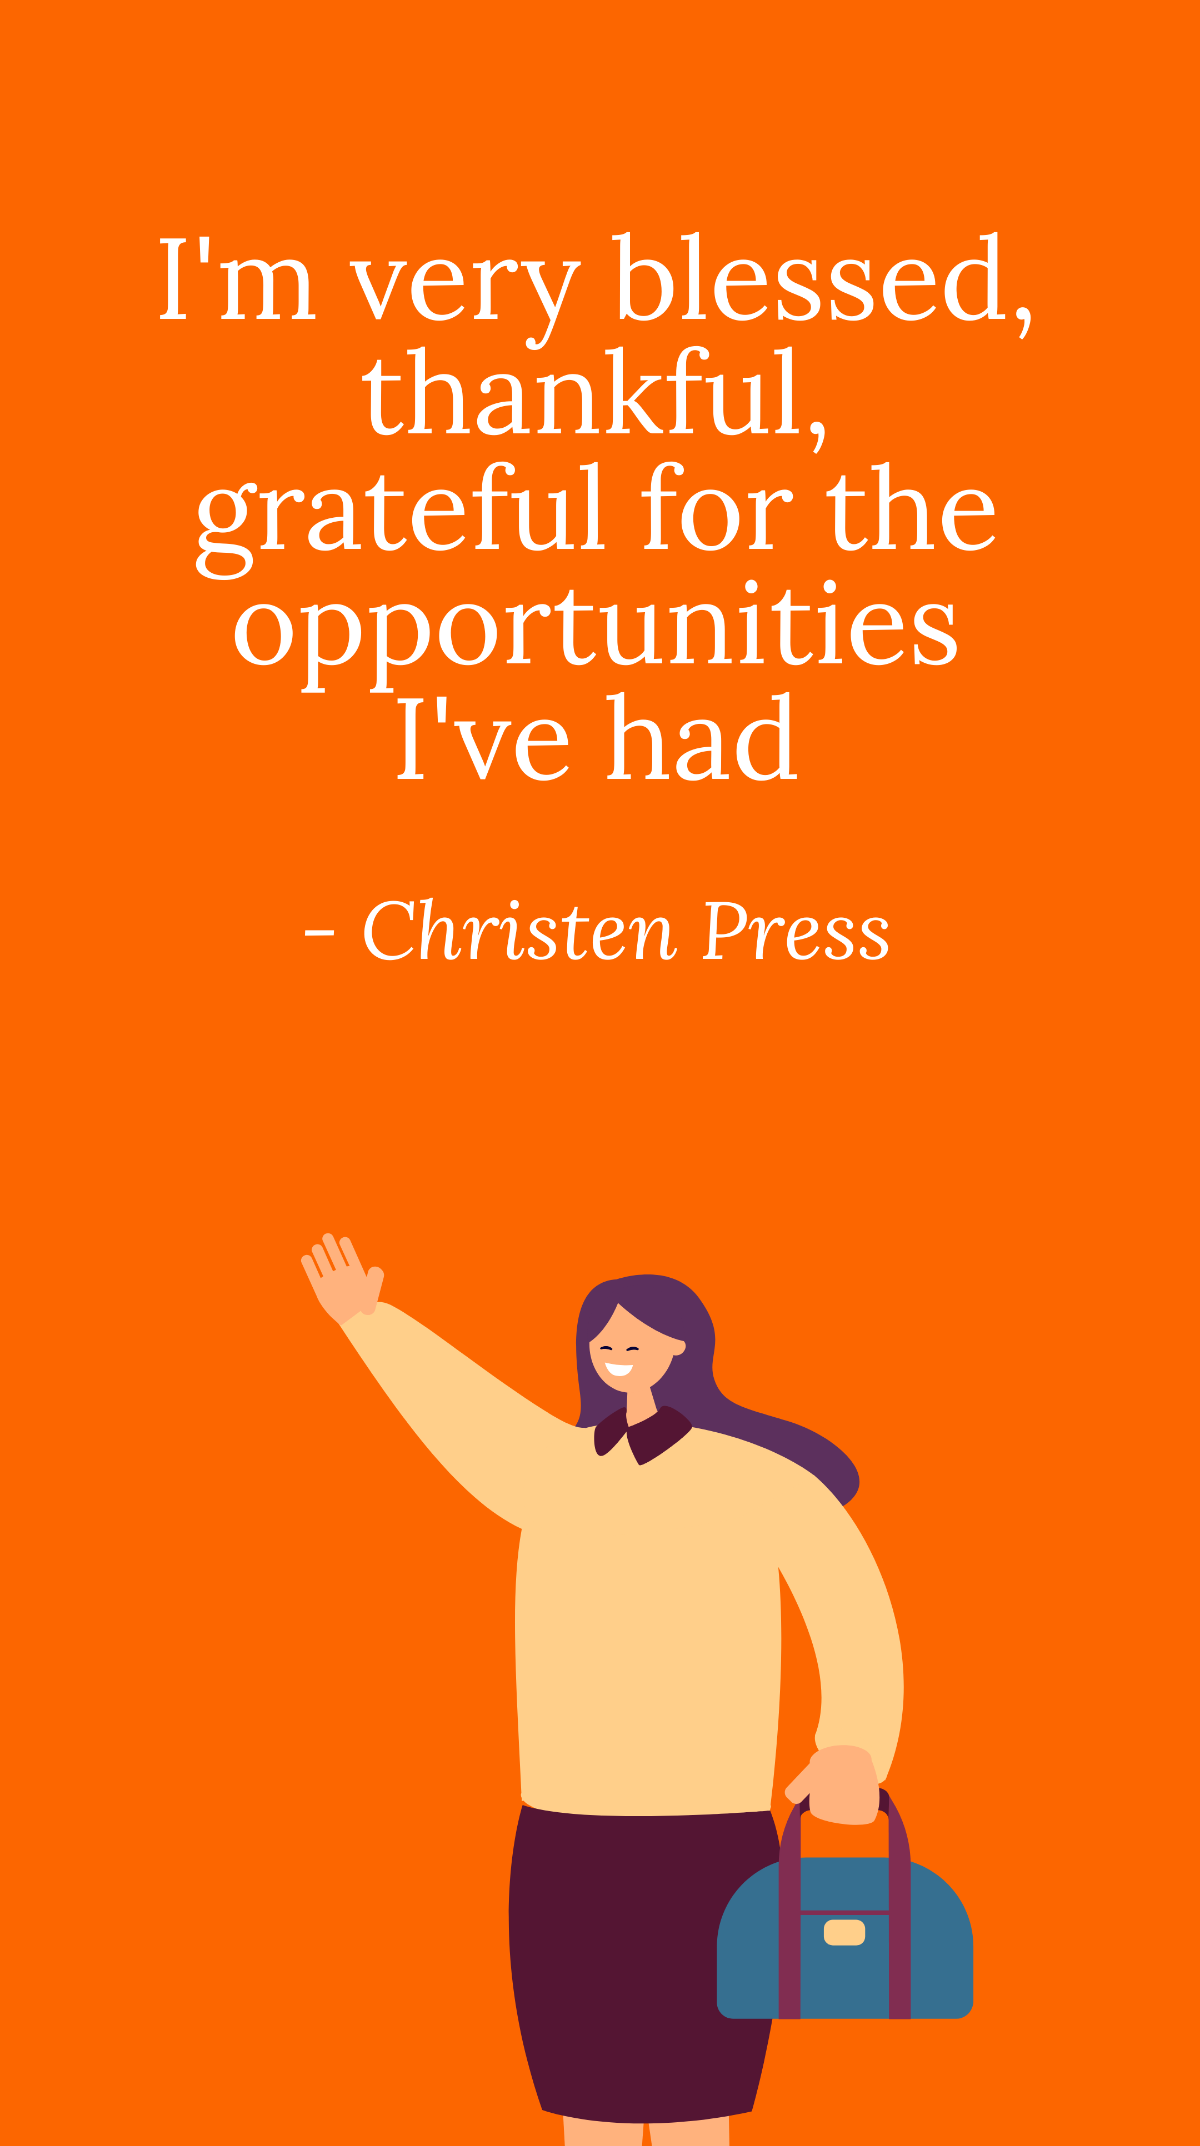 Free Christen Press - I'm very blessed, thankful, grateful for the opportunities I've had Template